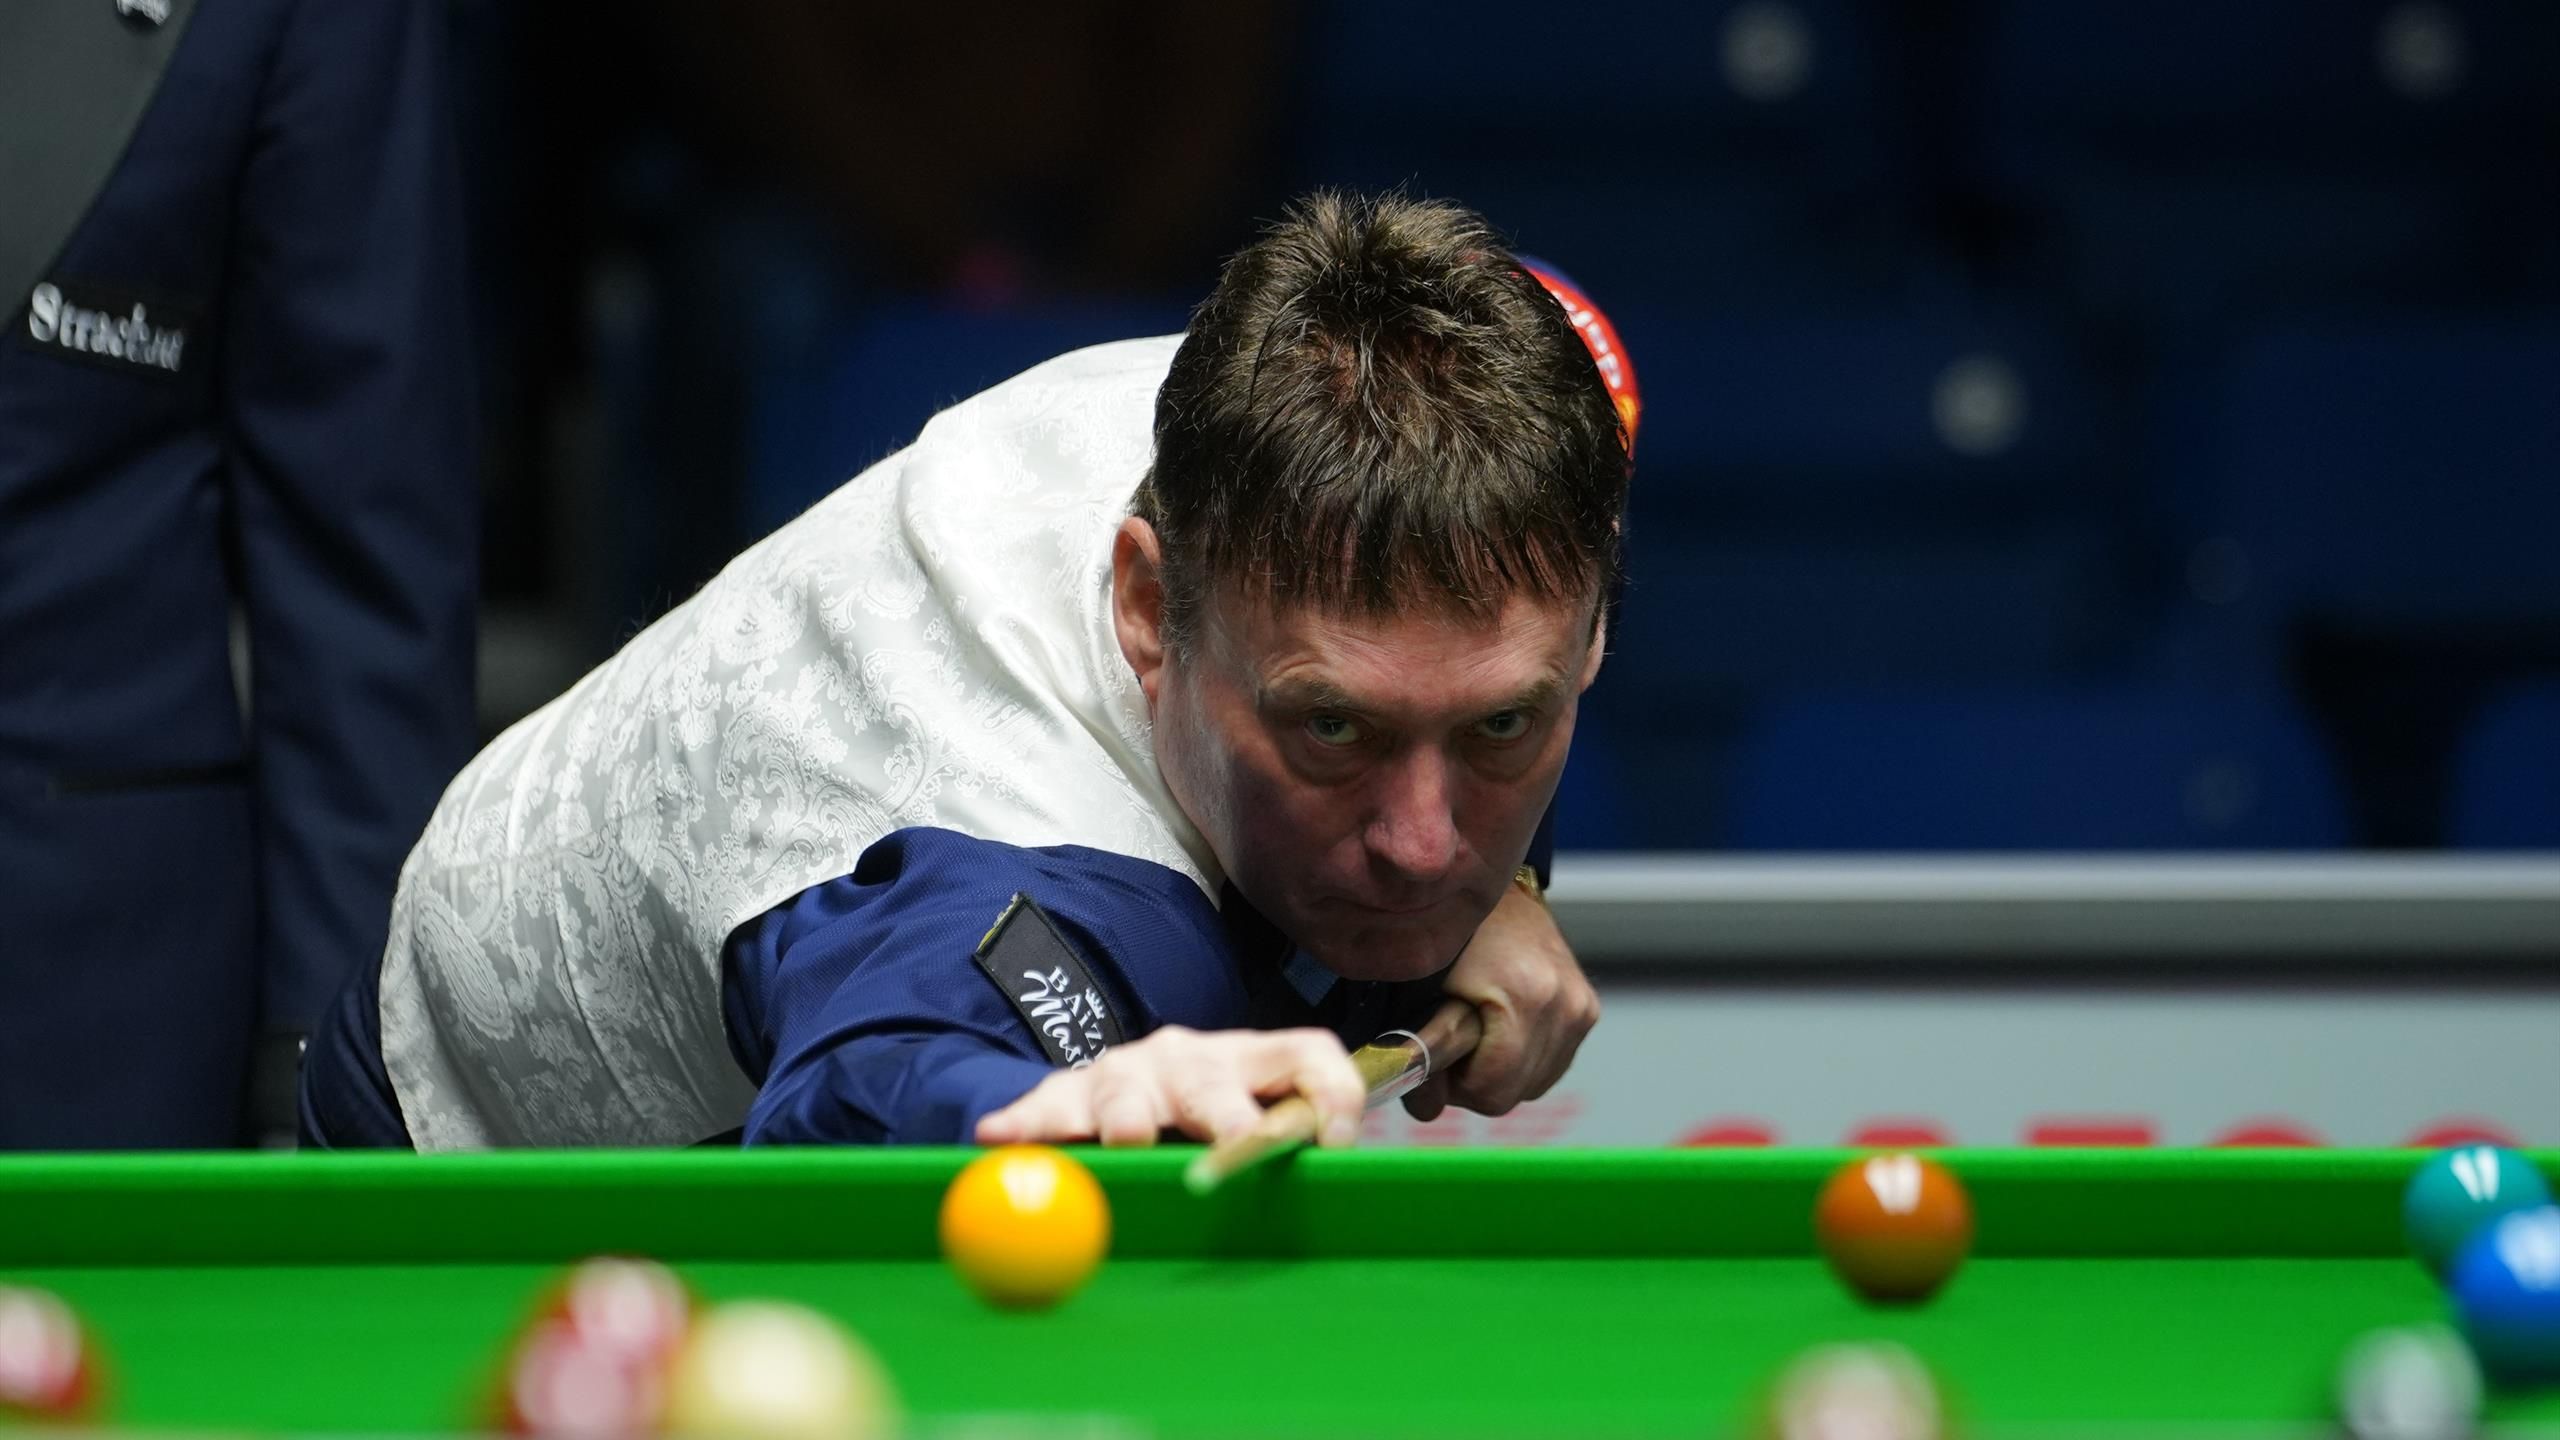 WST Classic snooker 2023 - Latest scores, results, schedule, order of play, Ronnie OSullivan, Jimmy White in action